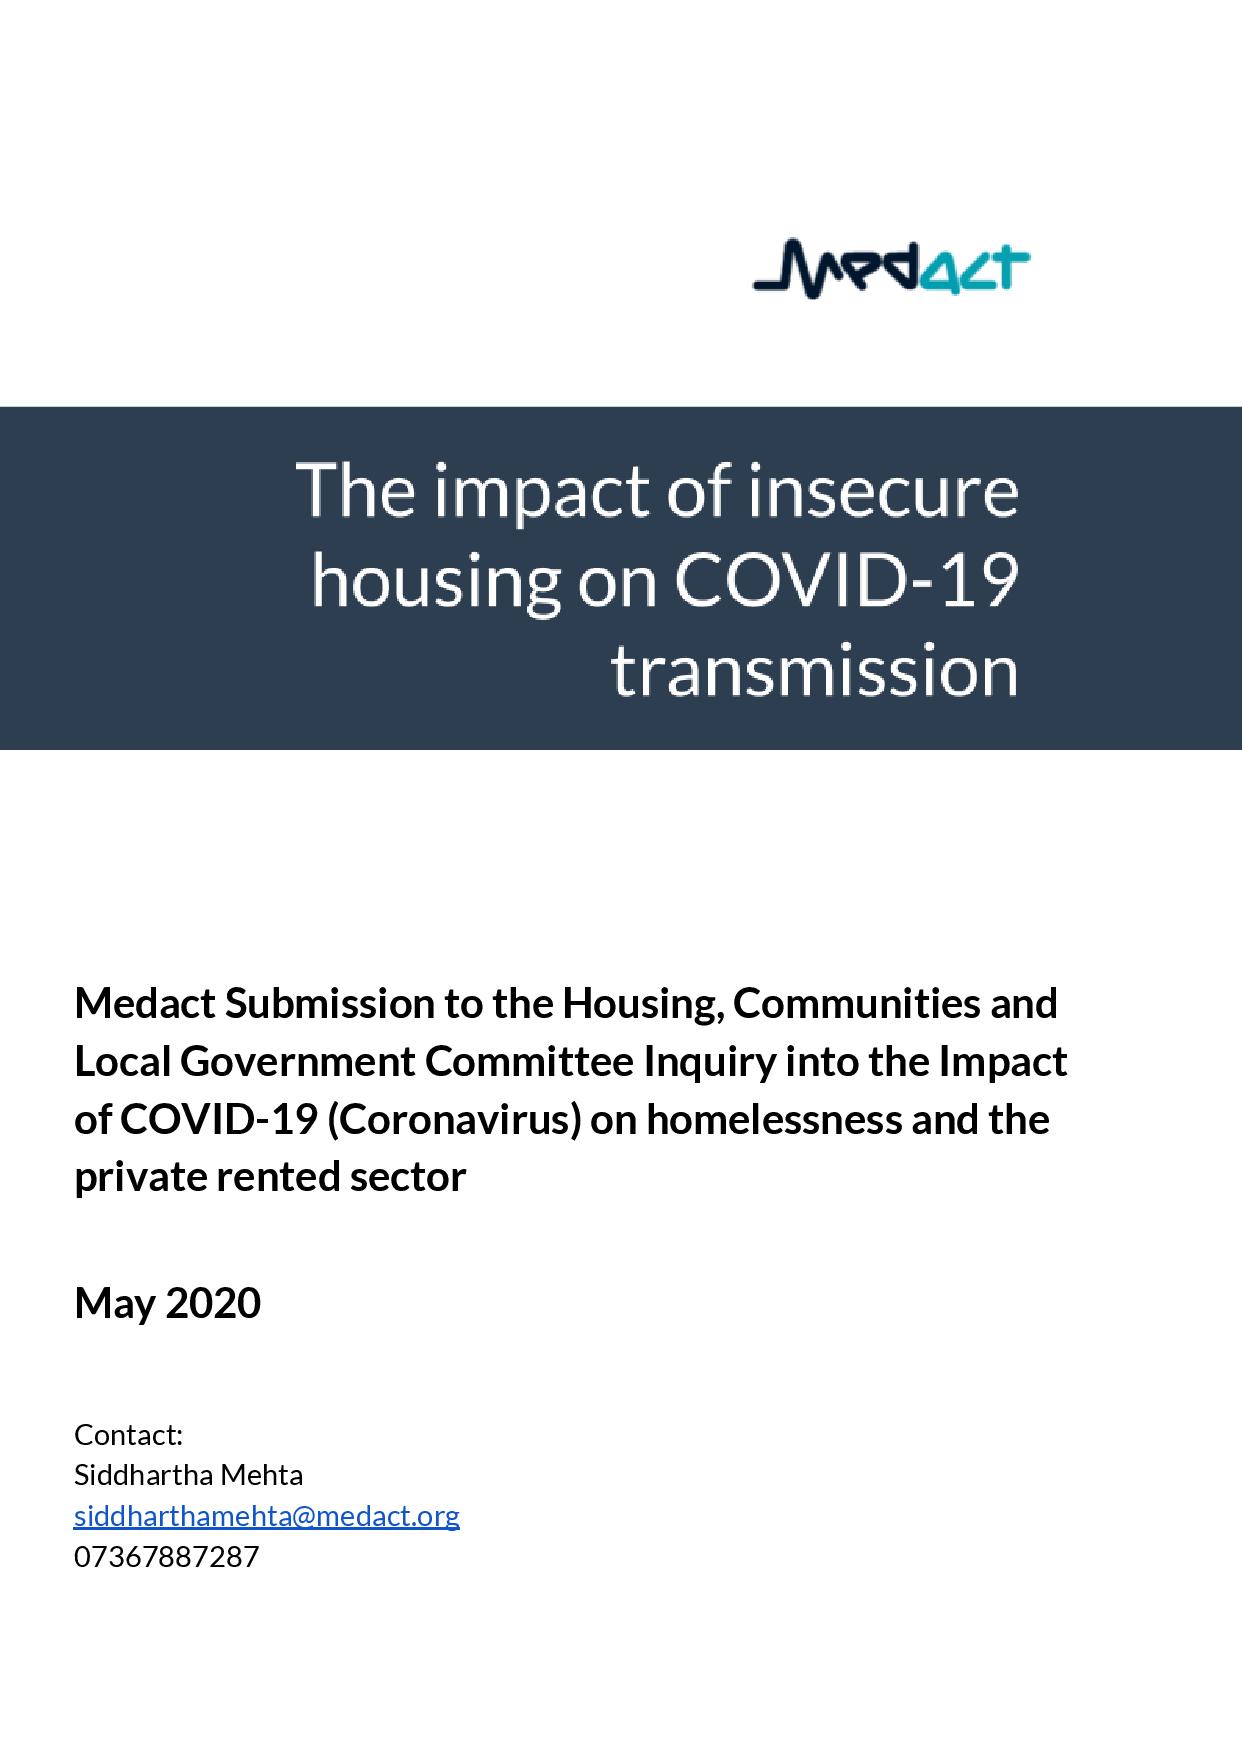 Submission to the Housing, Communities and Local Government Committee